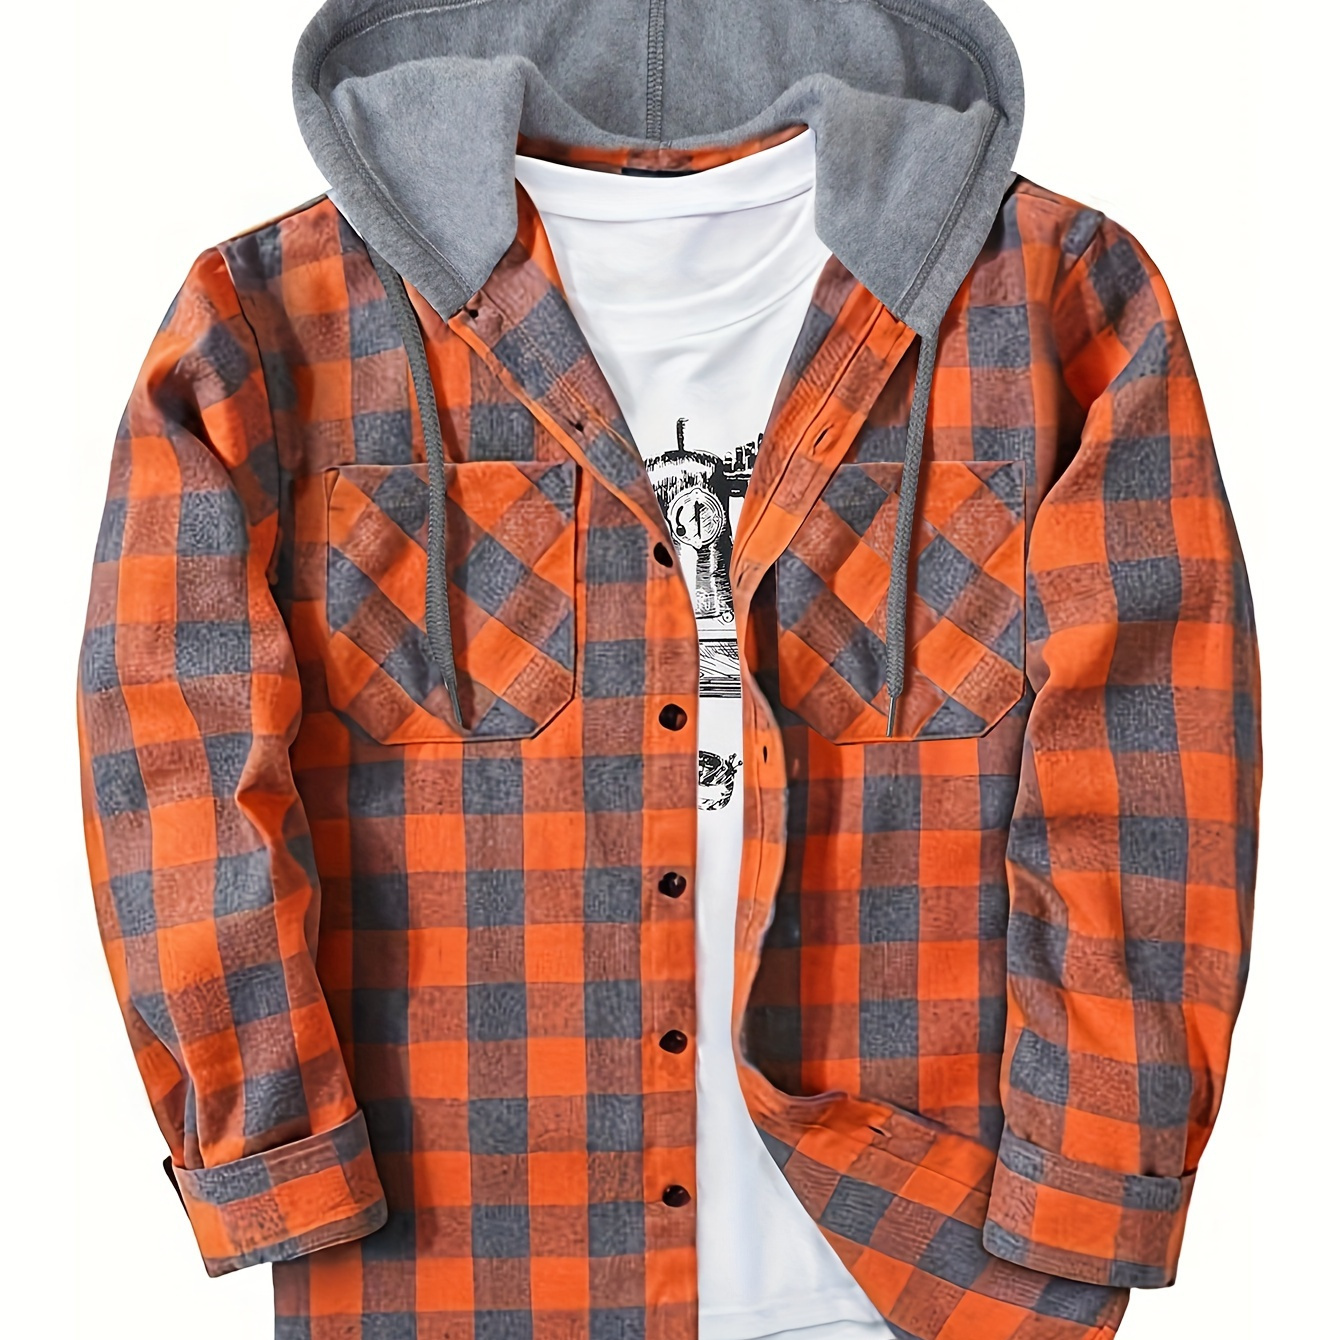 

Long Sleeve Casual Regular Fit Button Up Hooded Shirts Jacket, Plaid Shirt Coat For Men